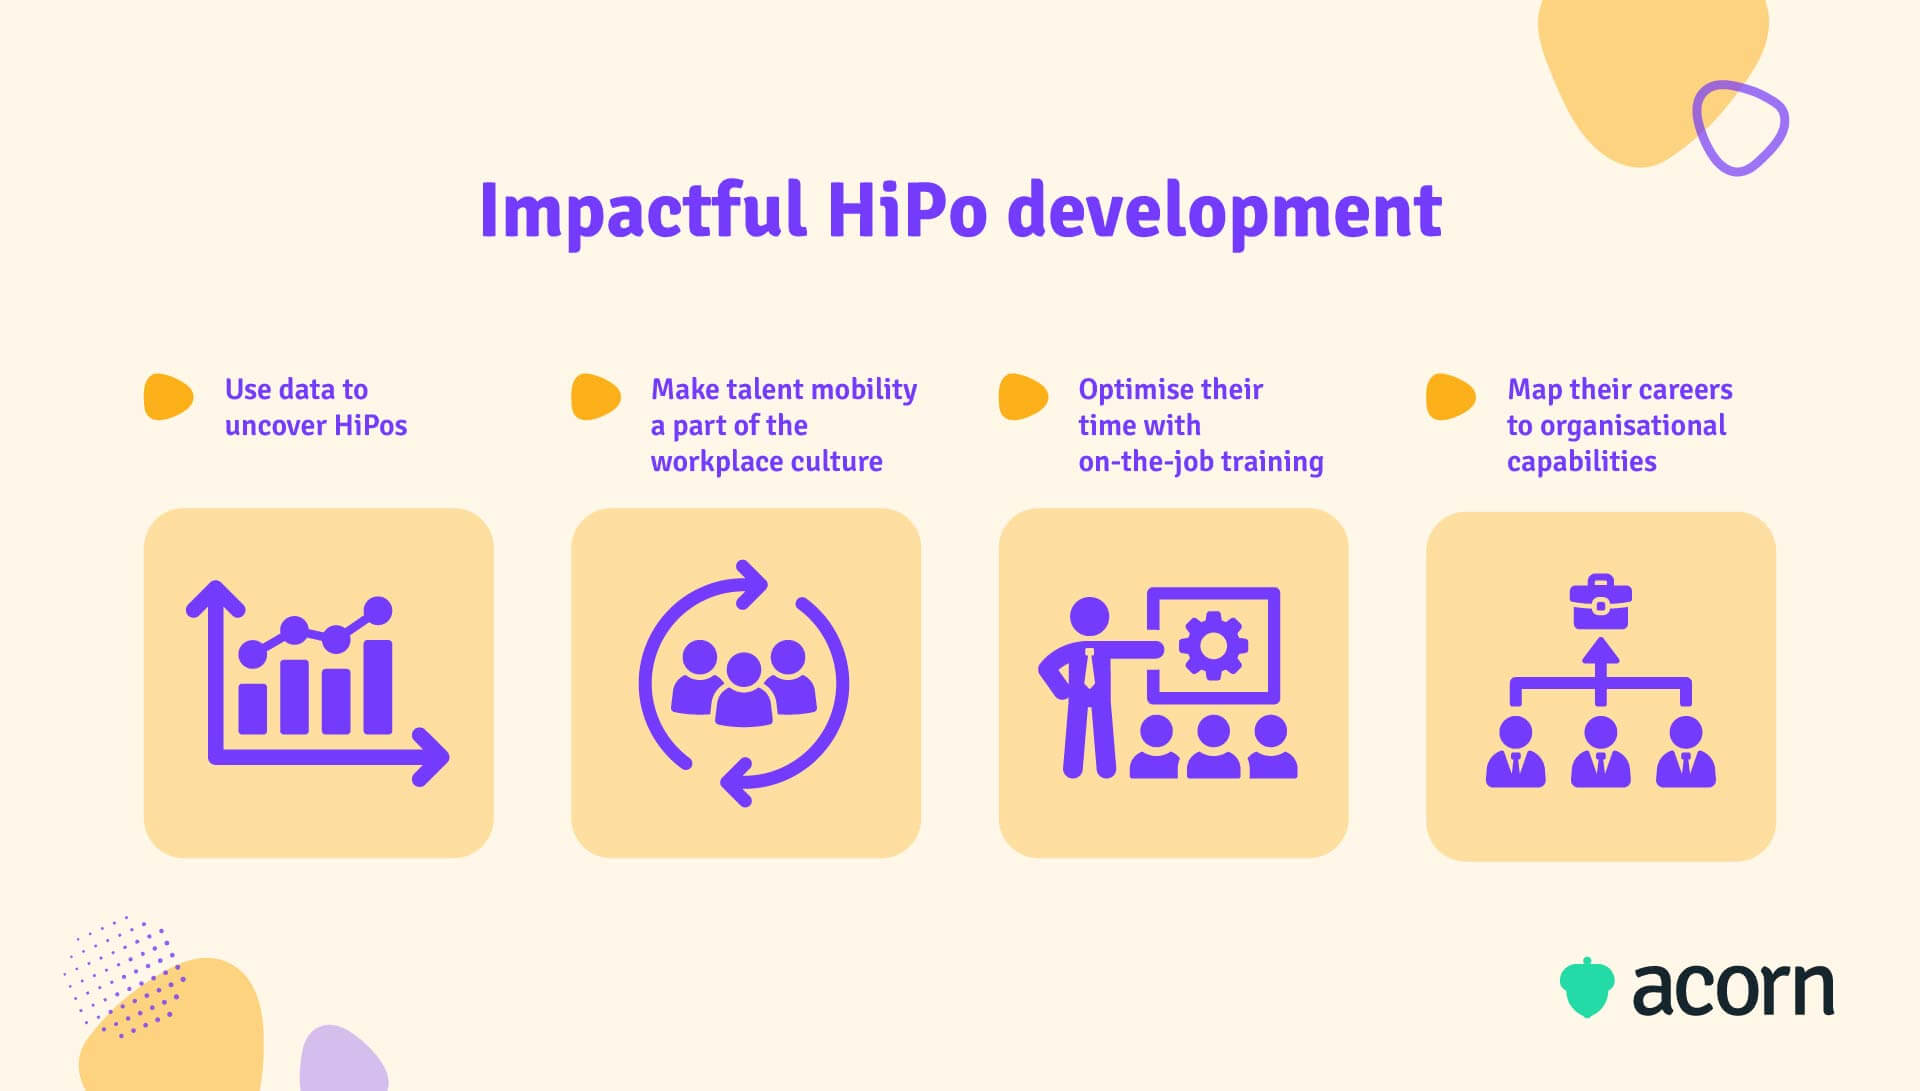 Infographic showing 4 steps for a HiPo development program